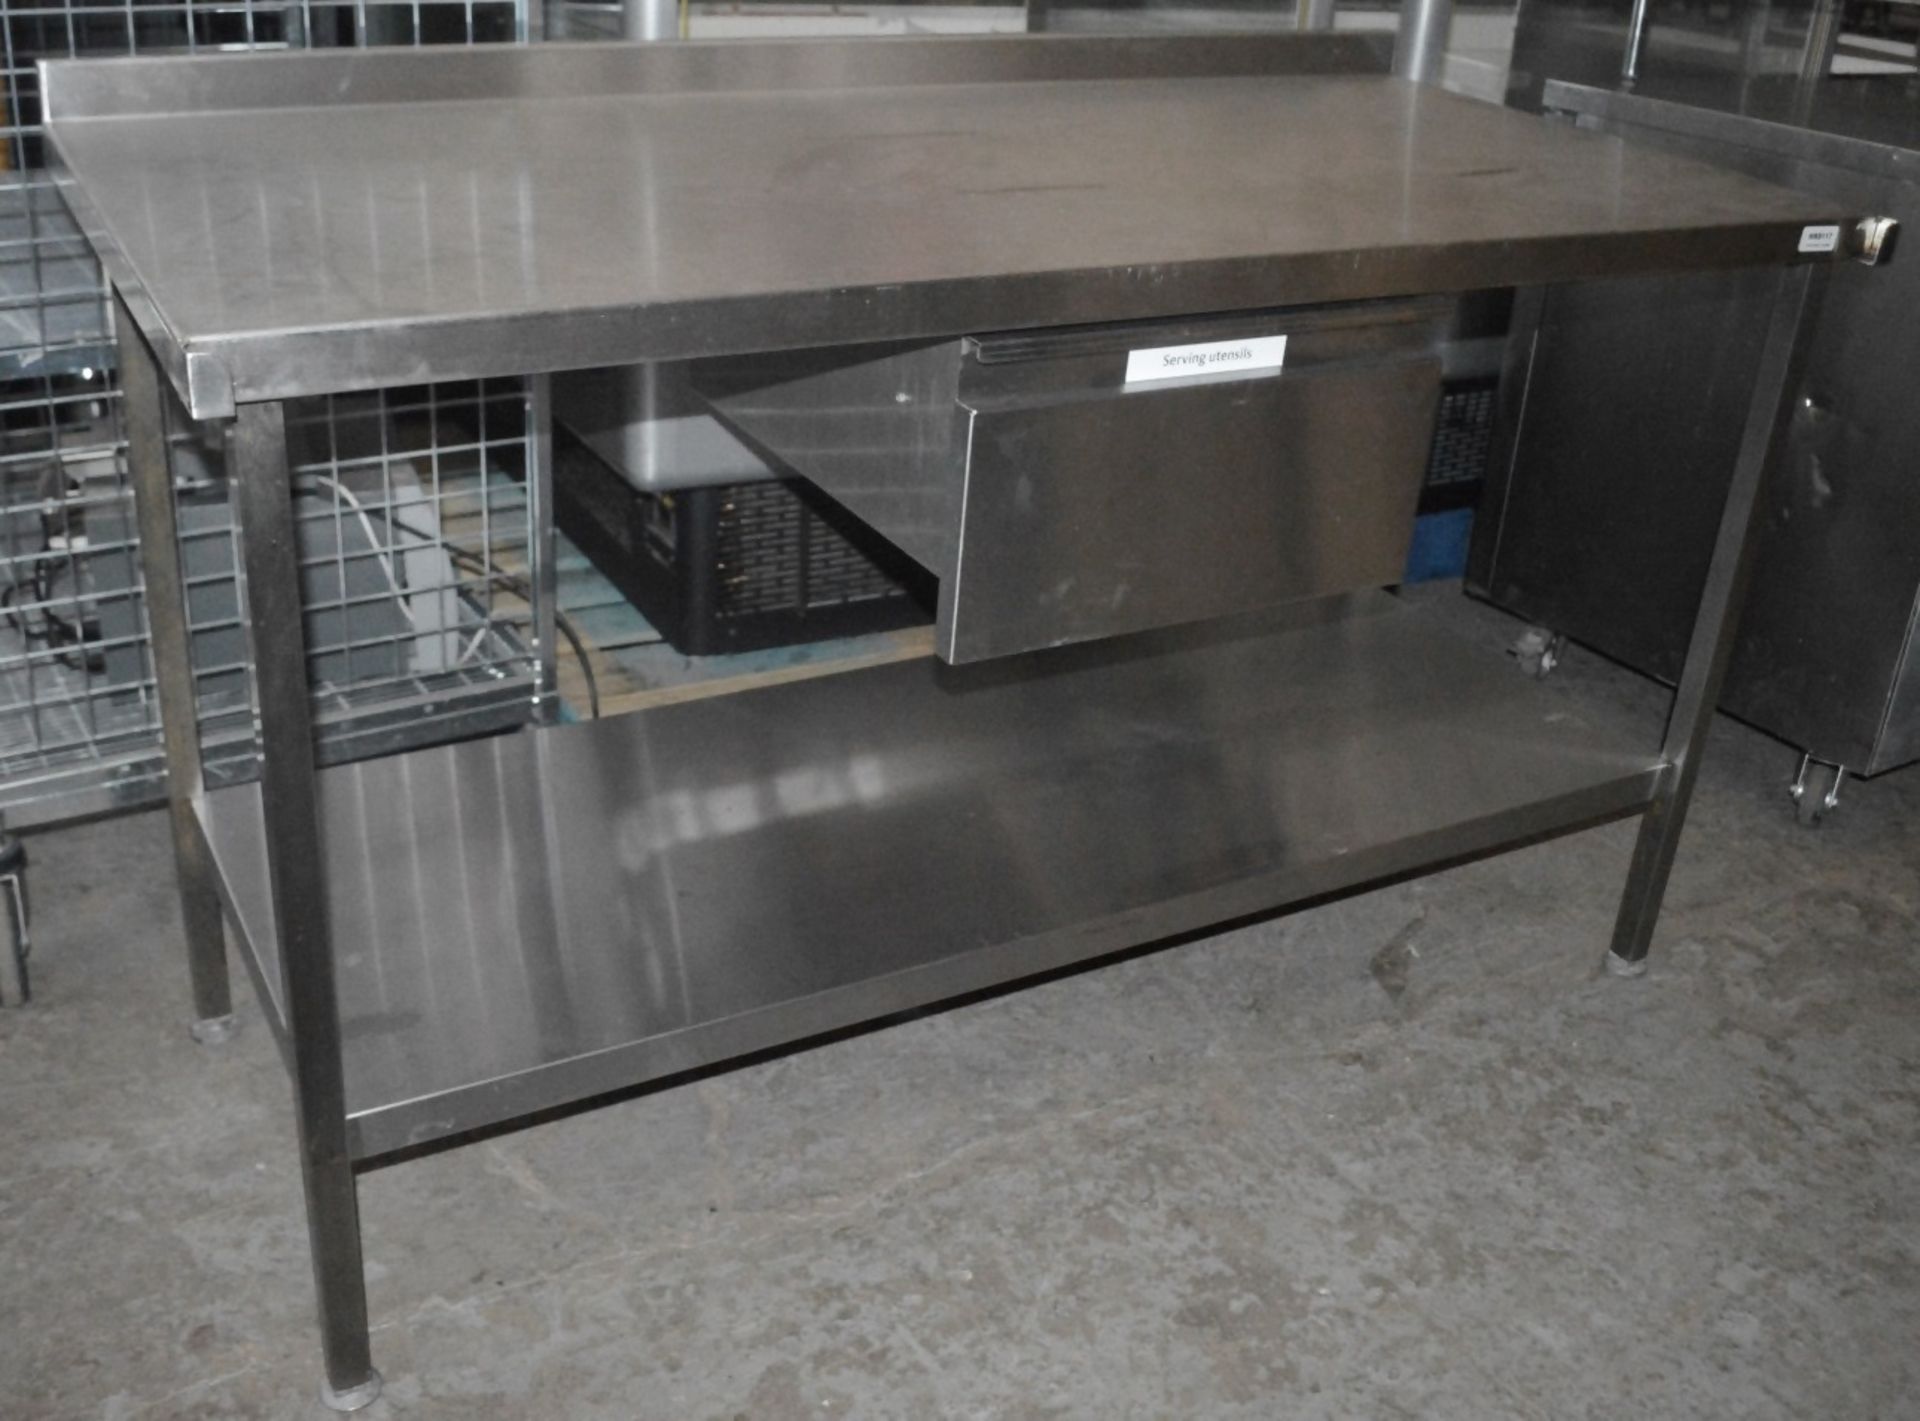 1 x Stainless Steel Commercial Kitchen Prep Bench With Drawer, Undershelf, And Upstand - Dimensions: